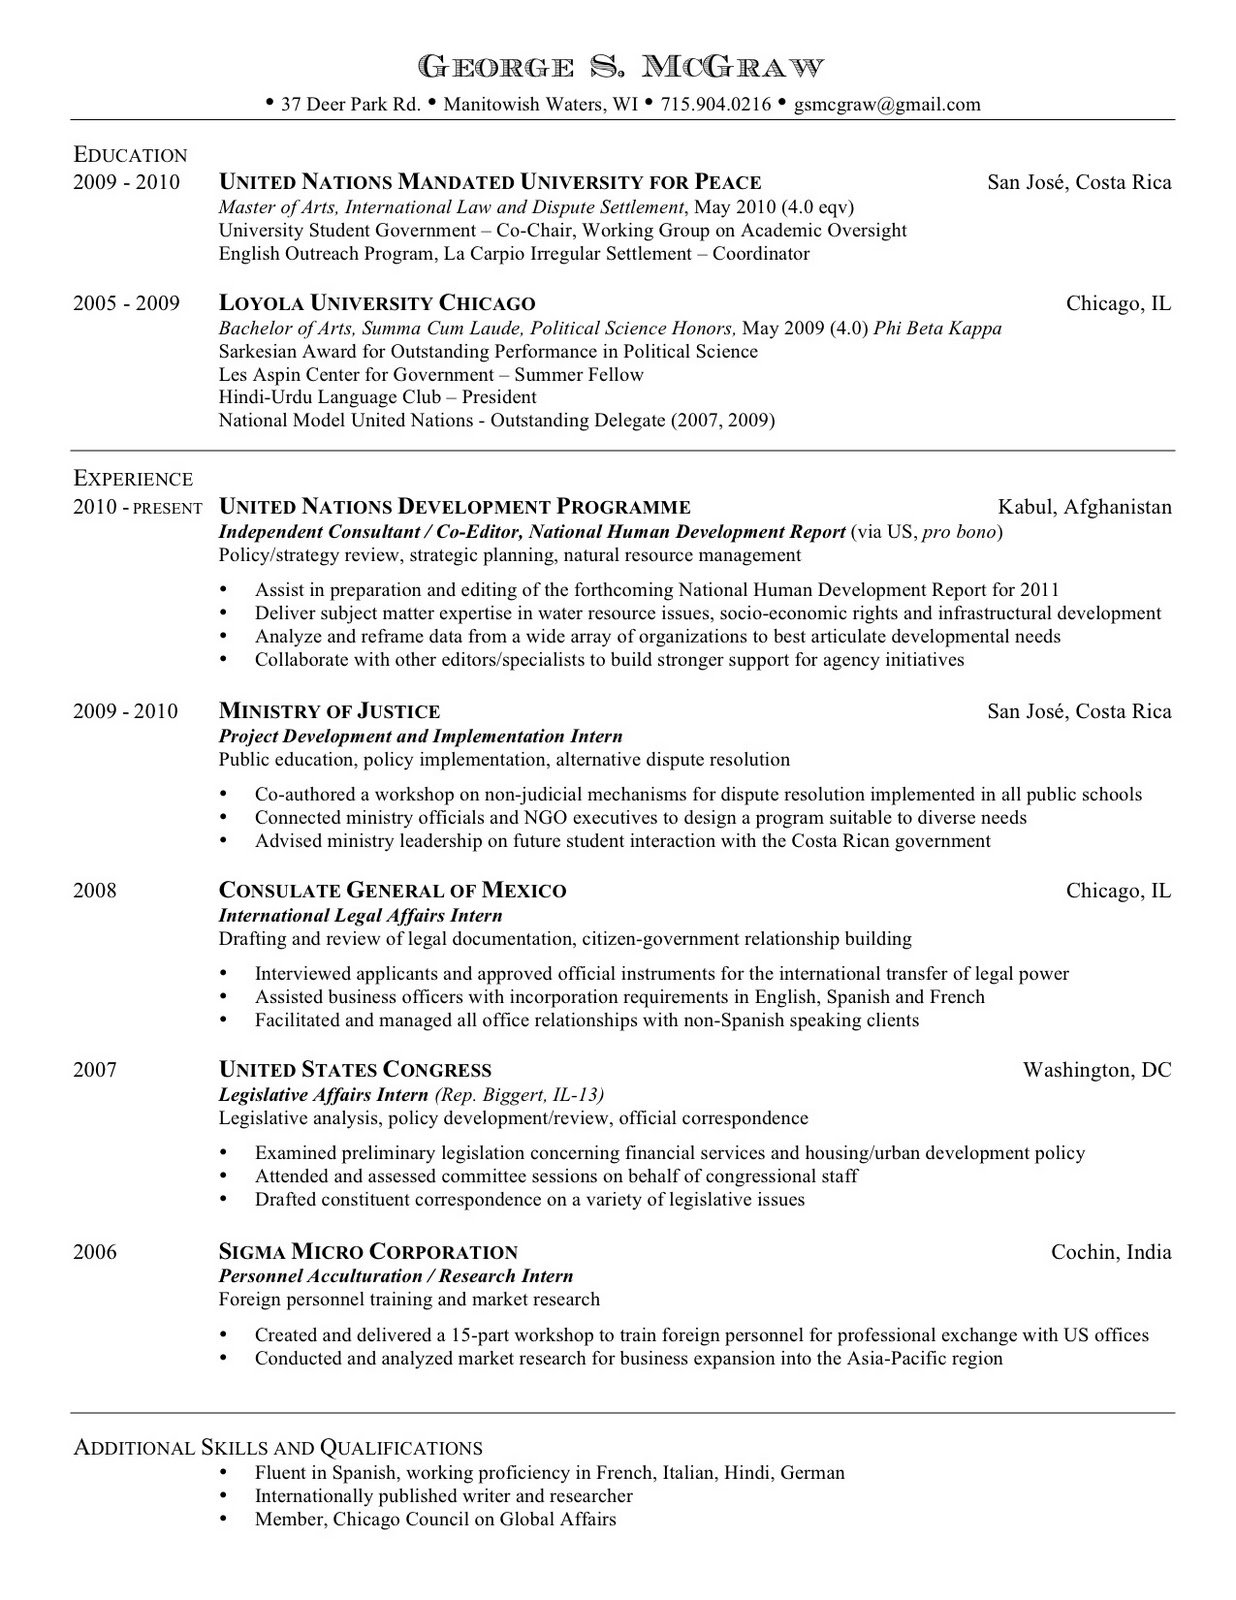 Resume published papers